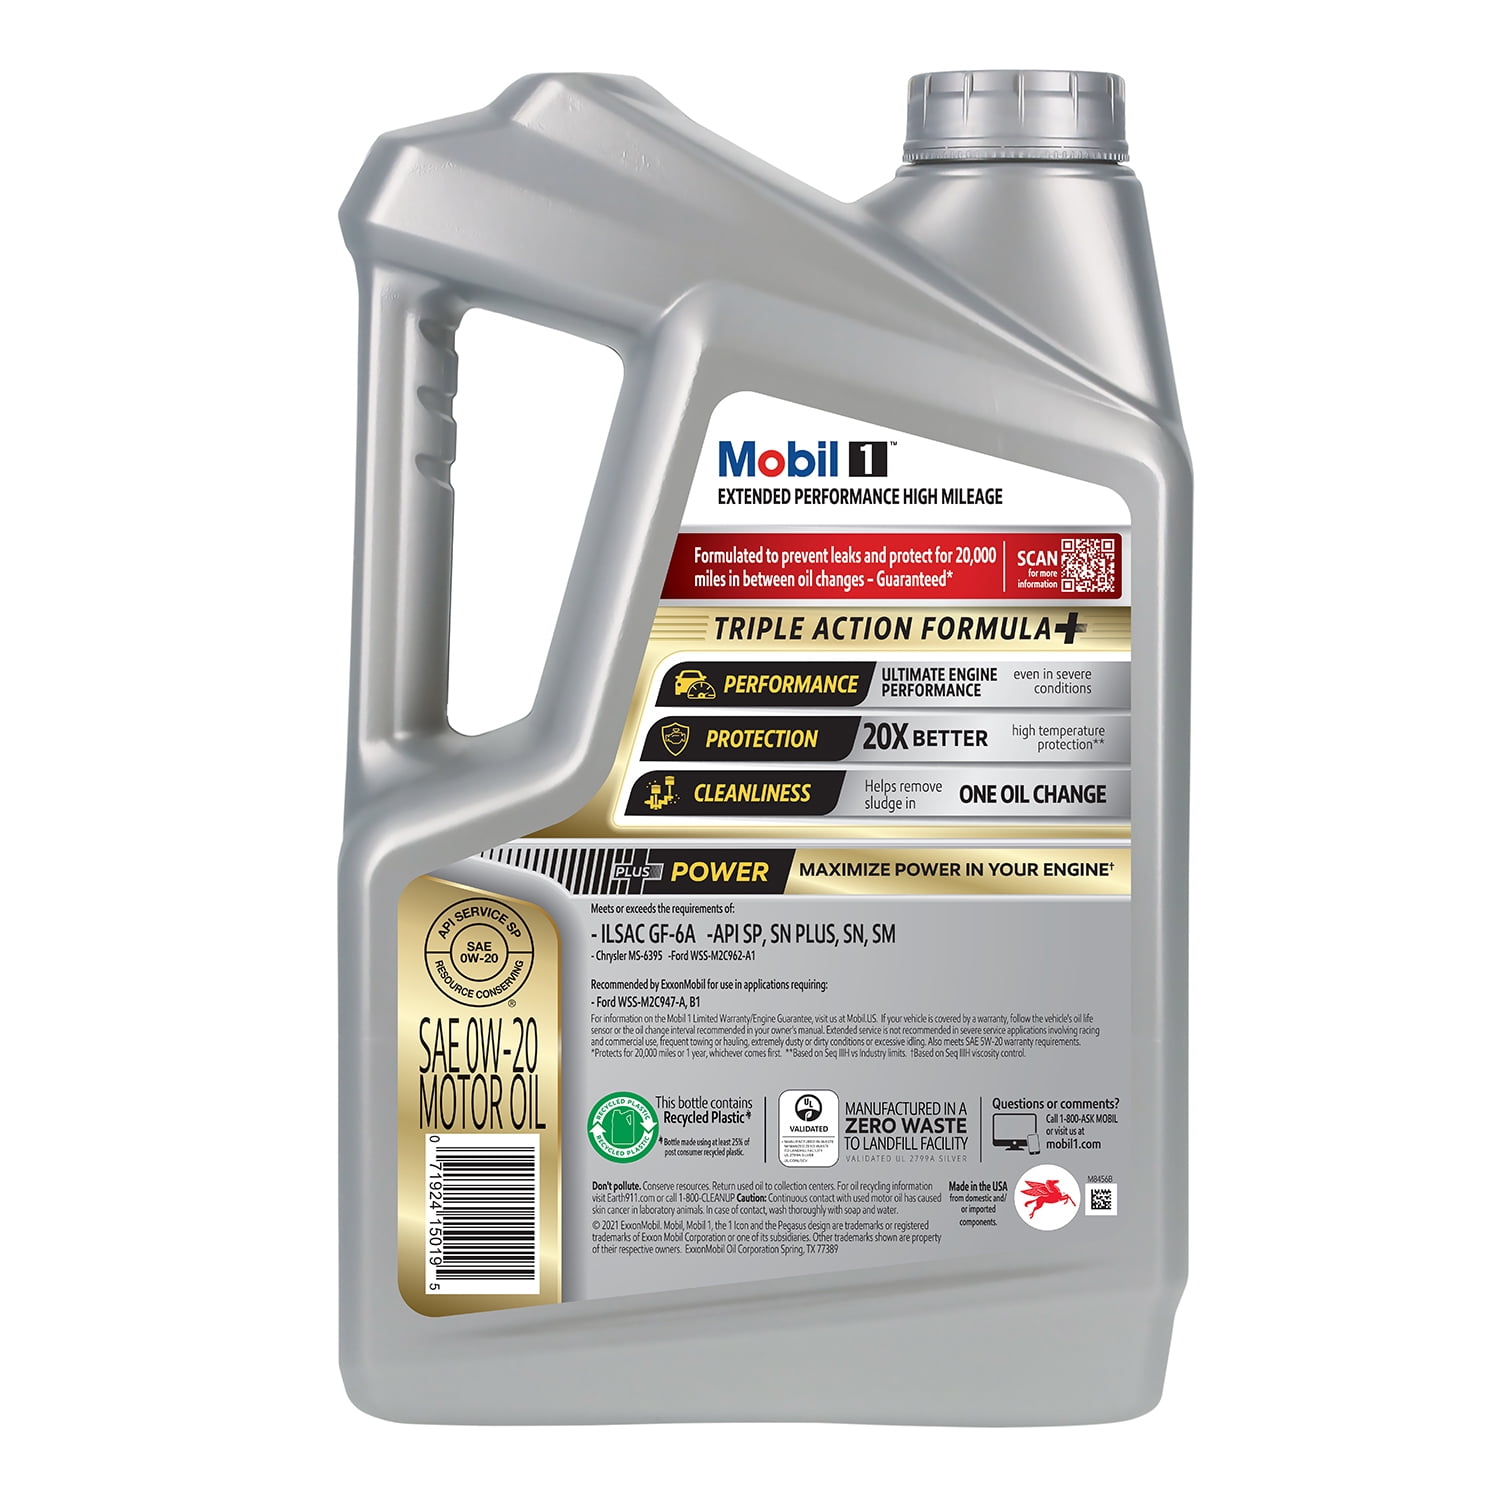 Mobil 1 Extended Performance High Mileage Full Synthetic Motor Oil 0W-20, 5 qt - 2